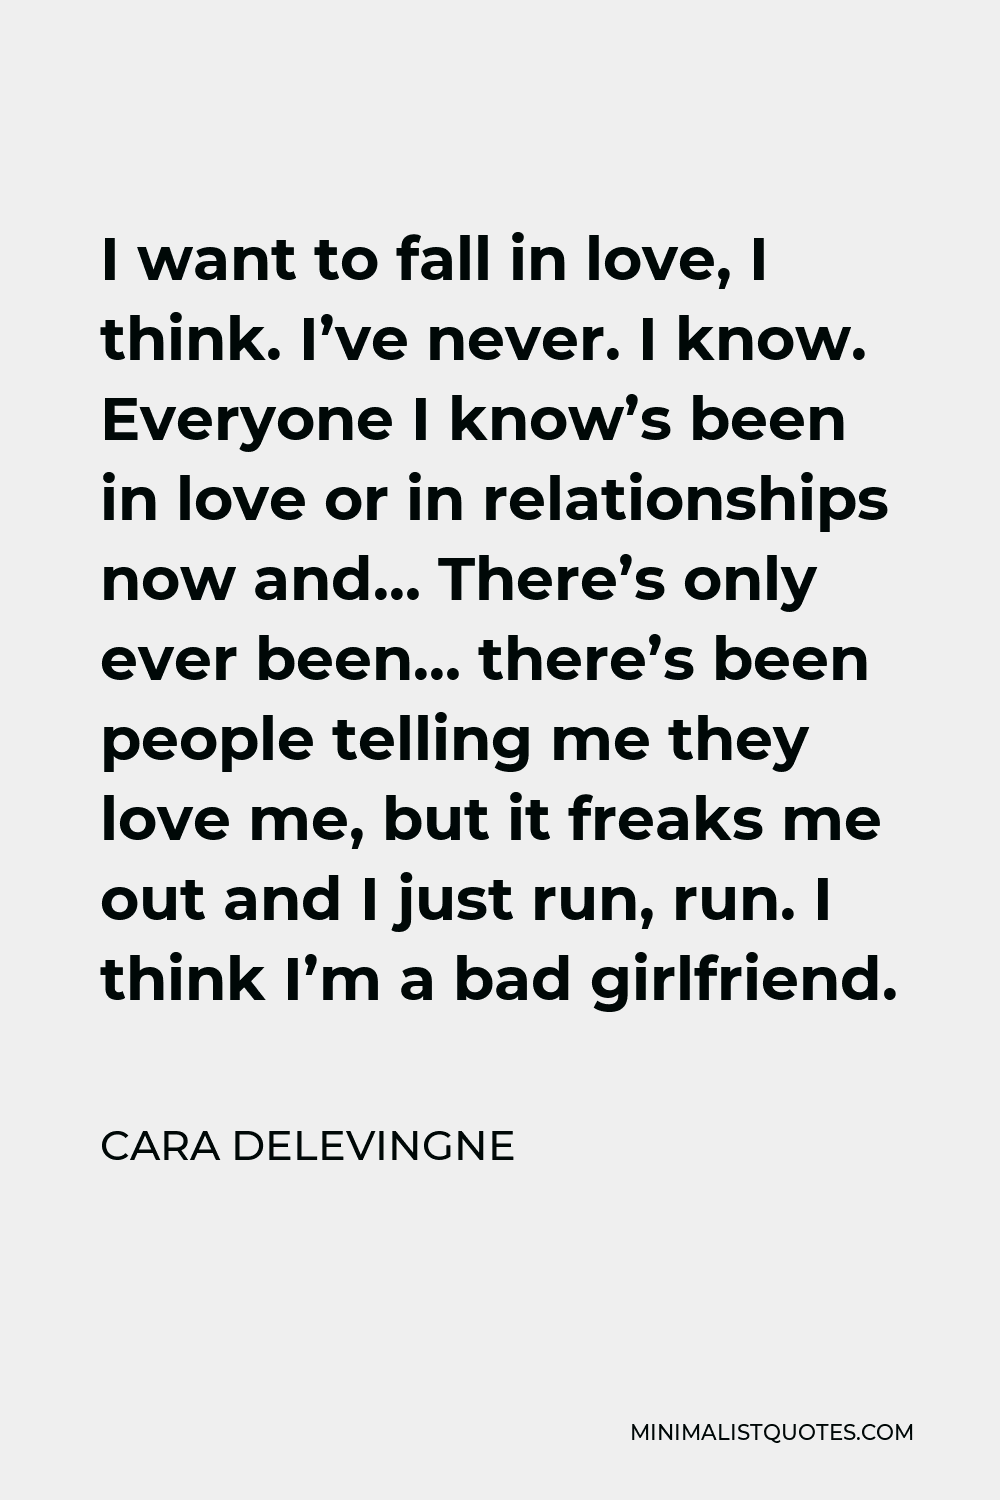 Cara Delevingne Quote - I want to fall in love, I think. I’ve never. I know. Everyone I know’s been in love or in relationships now and… There’s only ever been… there’s been people telling me they love me, but it freaks me out and I just run, run. I think I’m a bad girlfriend.